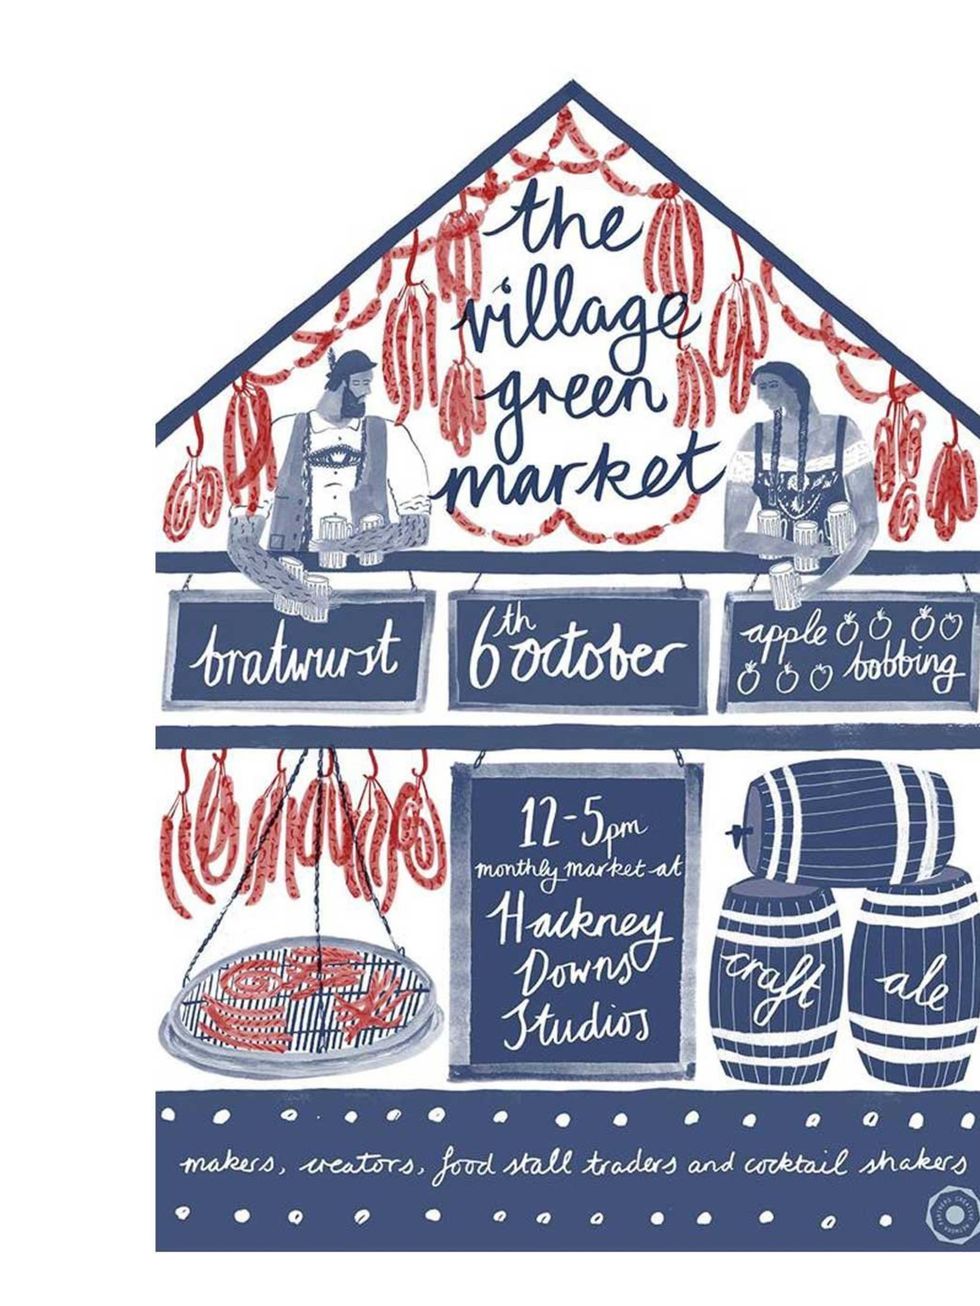 <p><strong>Oktoberfest </strong></p><p>On Sunday, enjoy some edible delights including beer, bratwurst and other locally sourced foods as well as great live music at Hackney Downs Studio. Check out the 20 vintage clothing and antique stalls while you are 